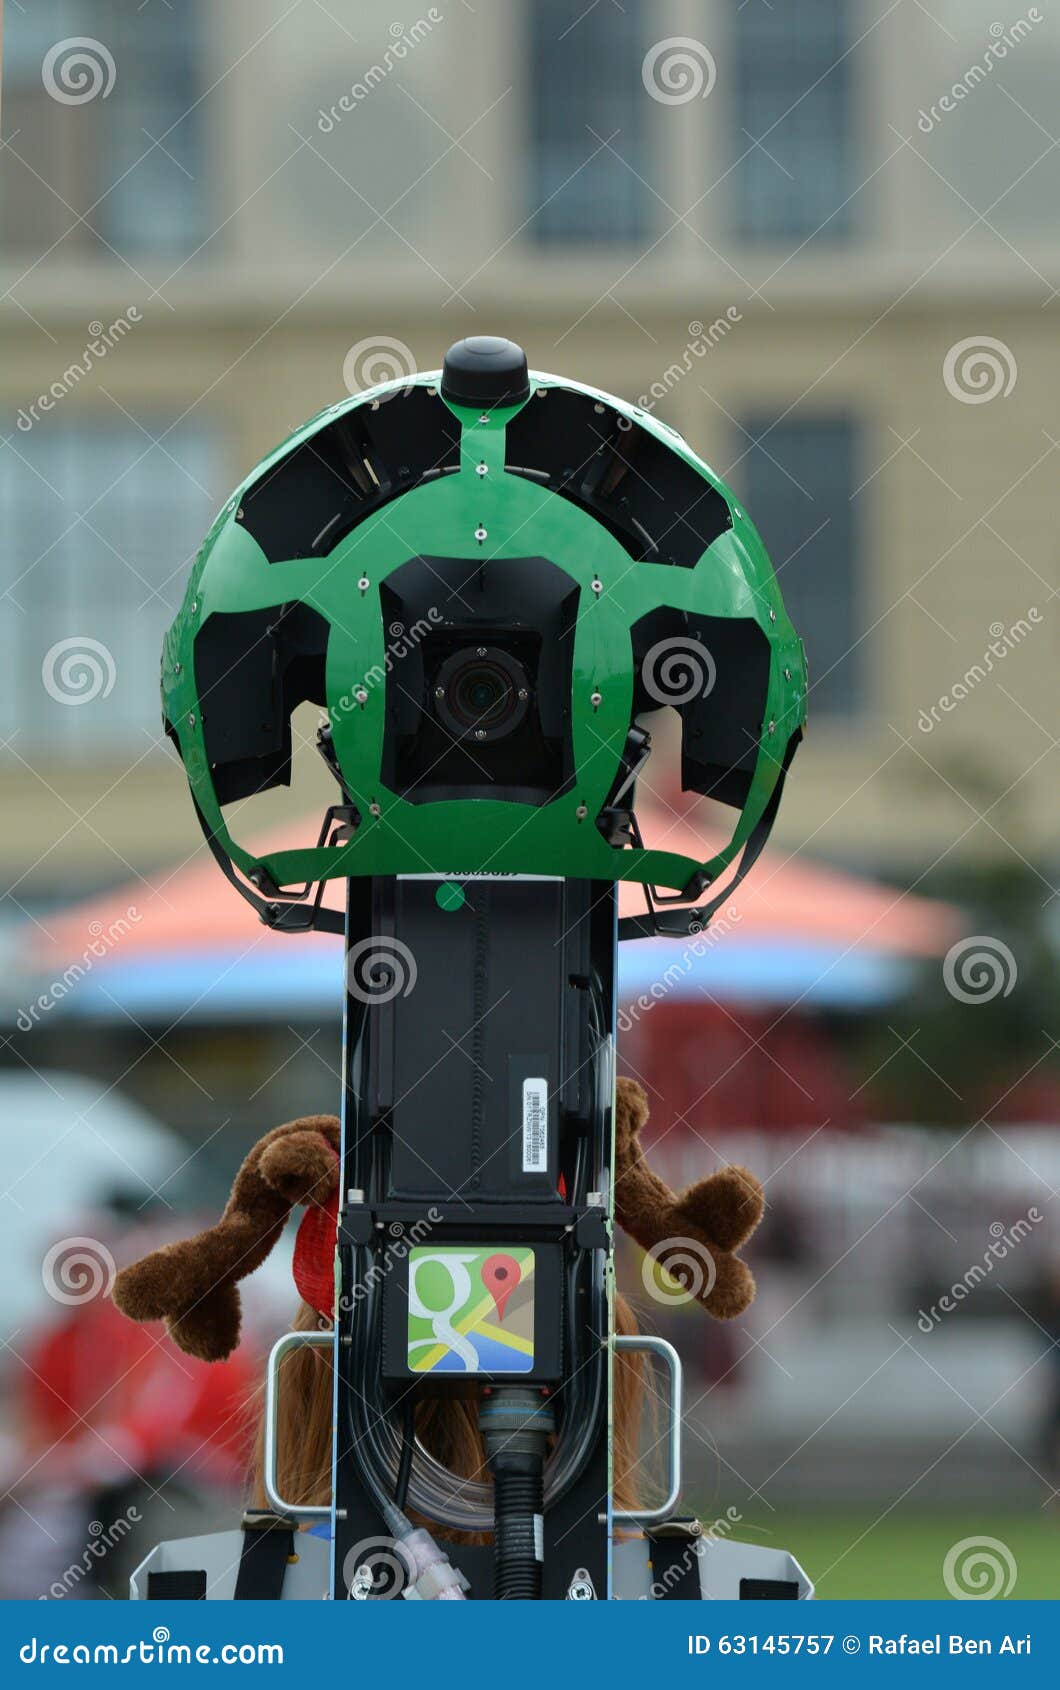 Google Street View Camera At Work Editorial Photography - Image: 63145757